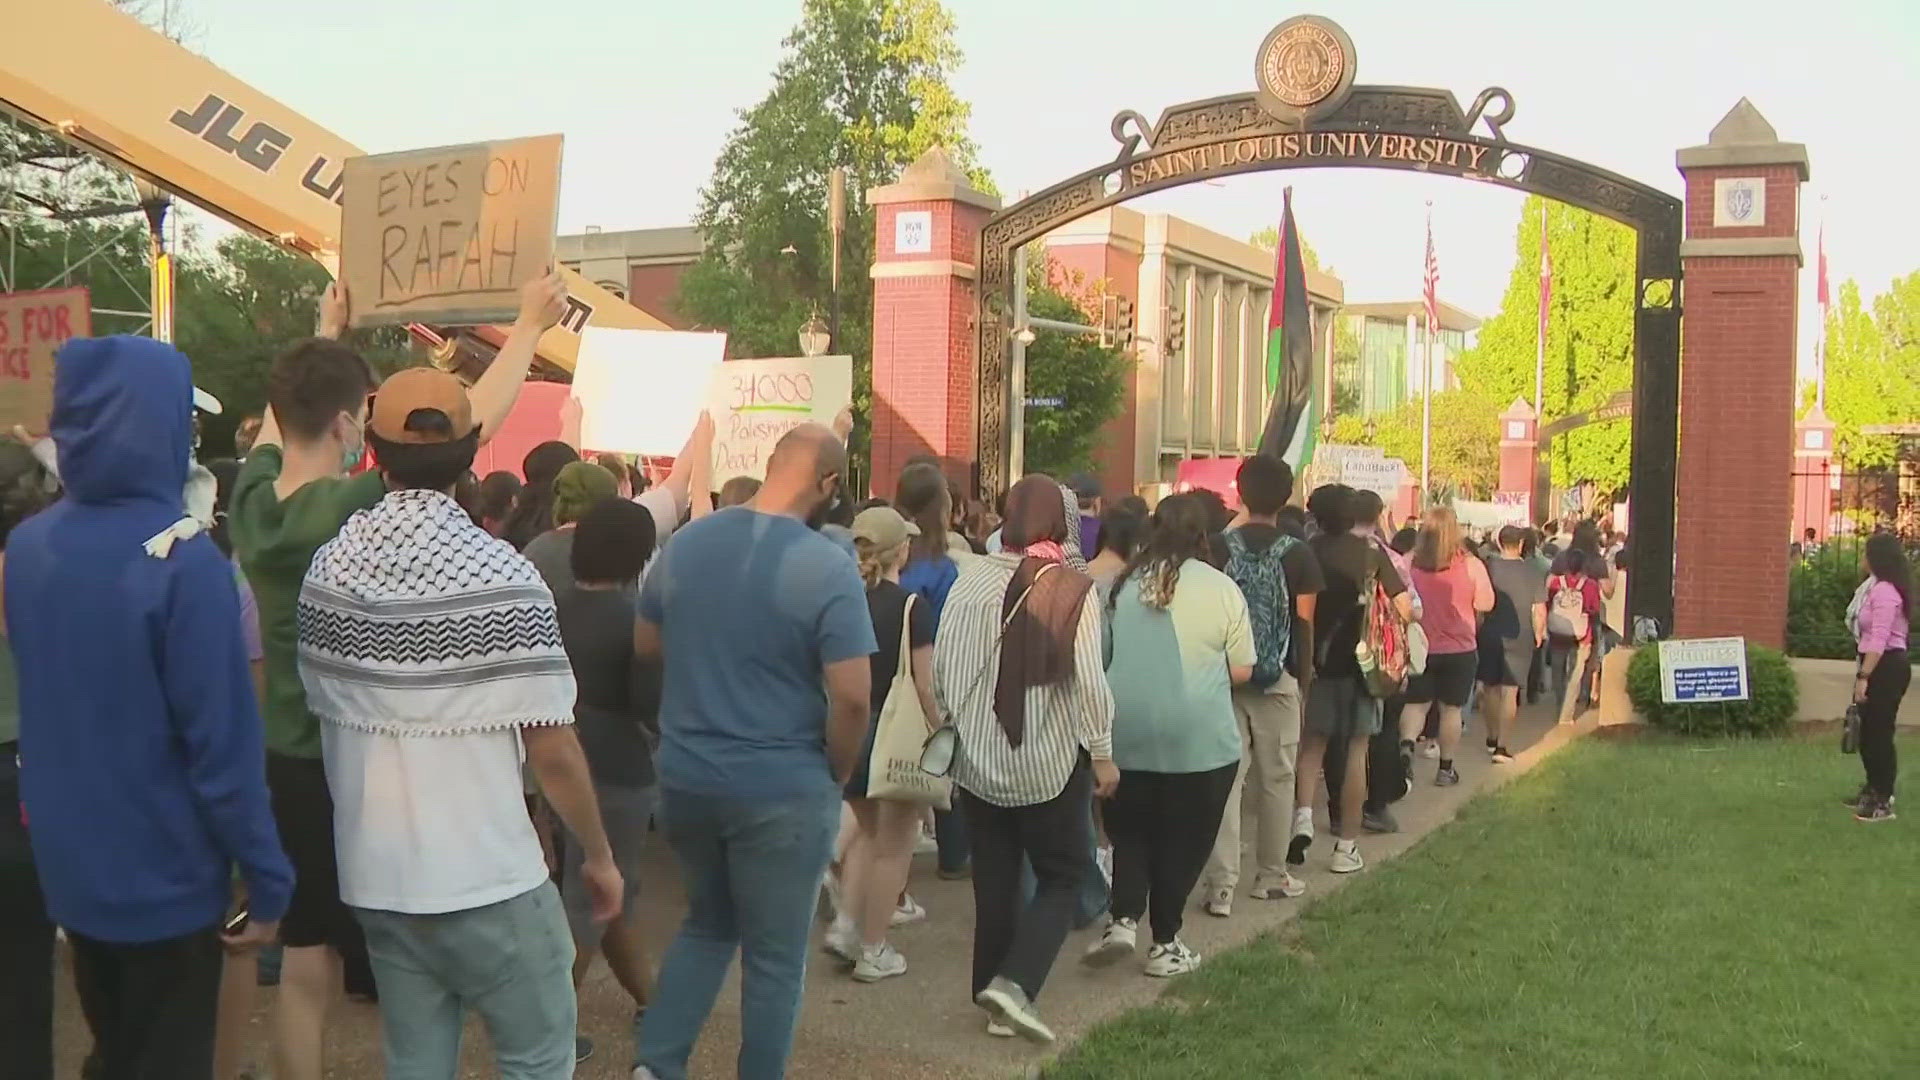 For more than two hours, Pro-Palestinian protesters demonstrated and marched across Saint Louis University's campus. Their messages were loud and clear.